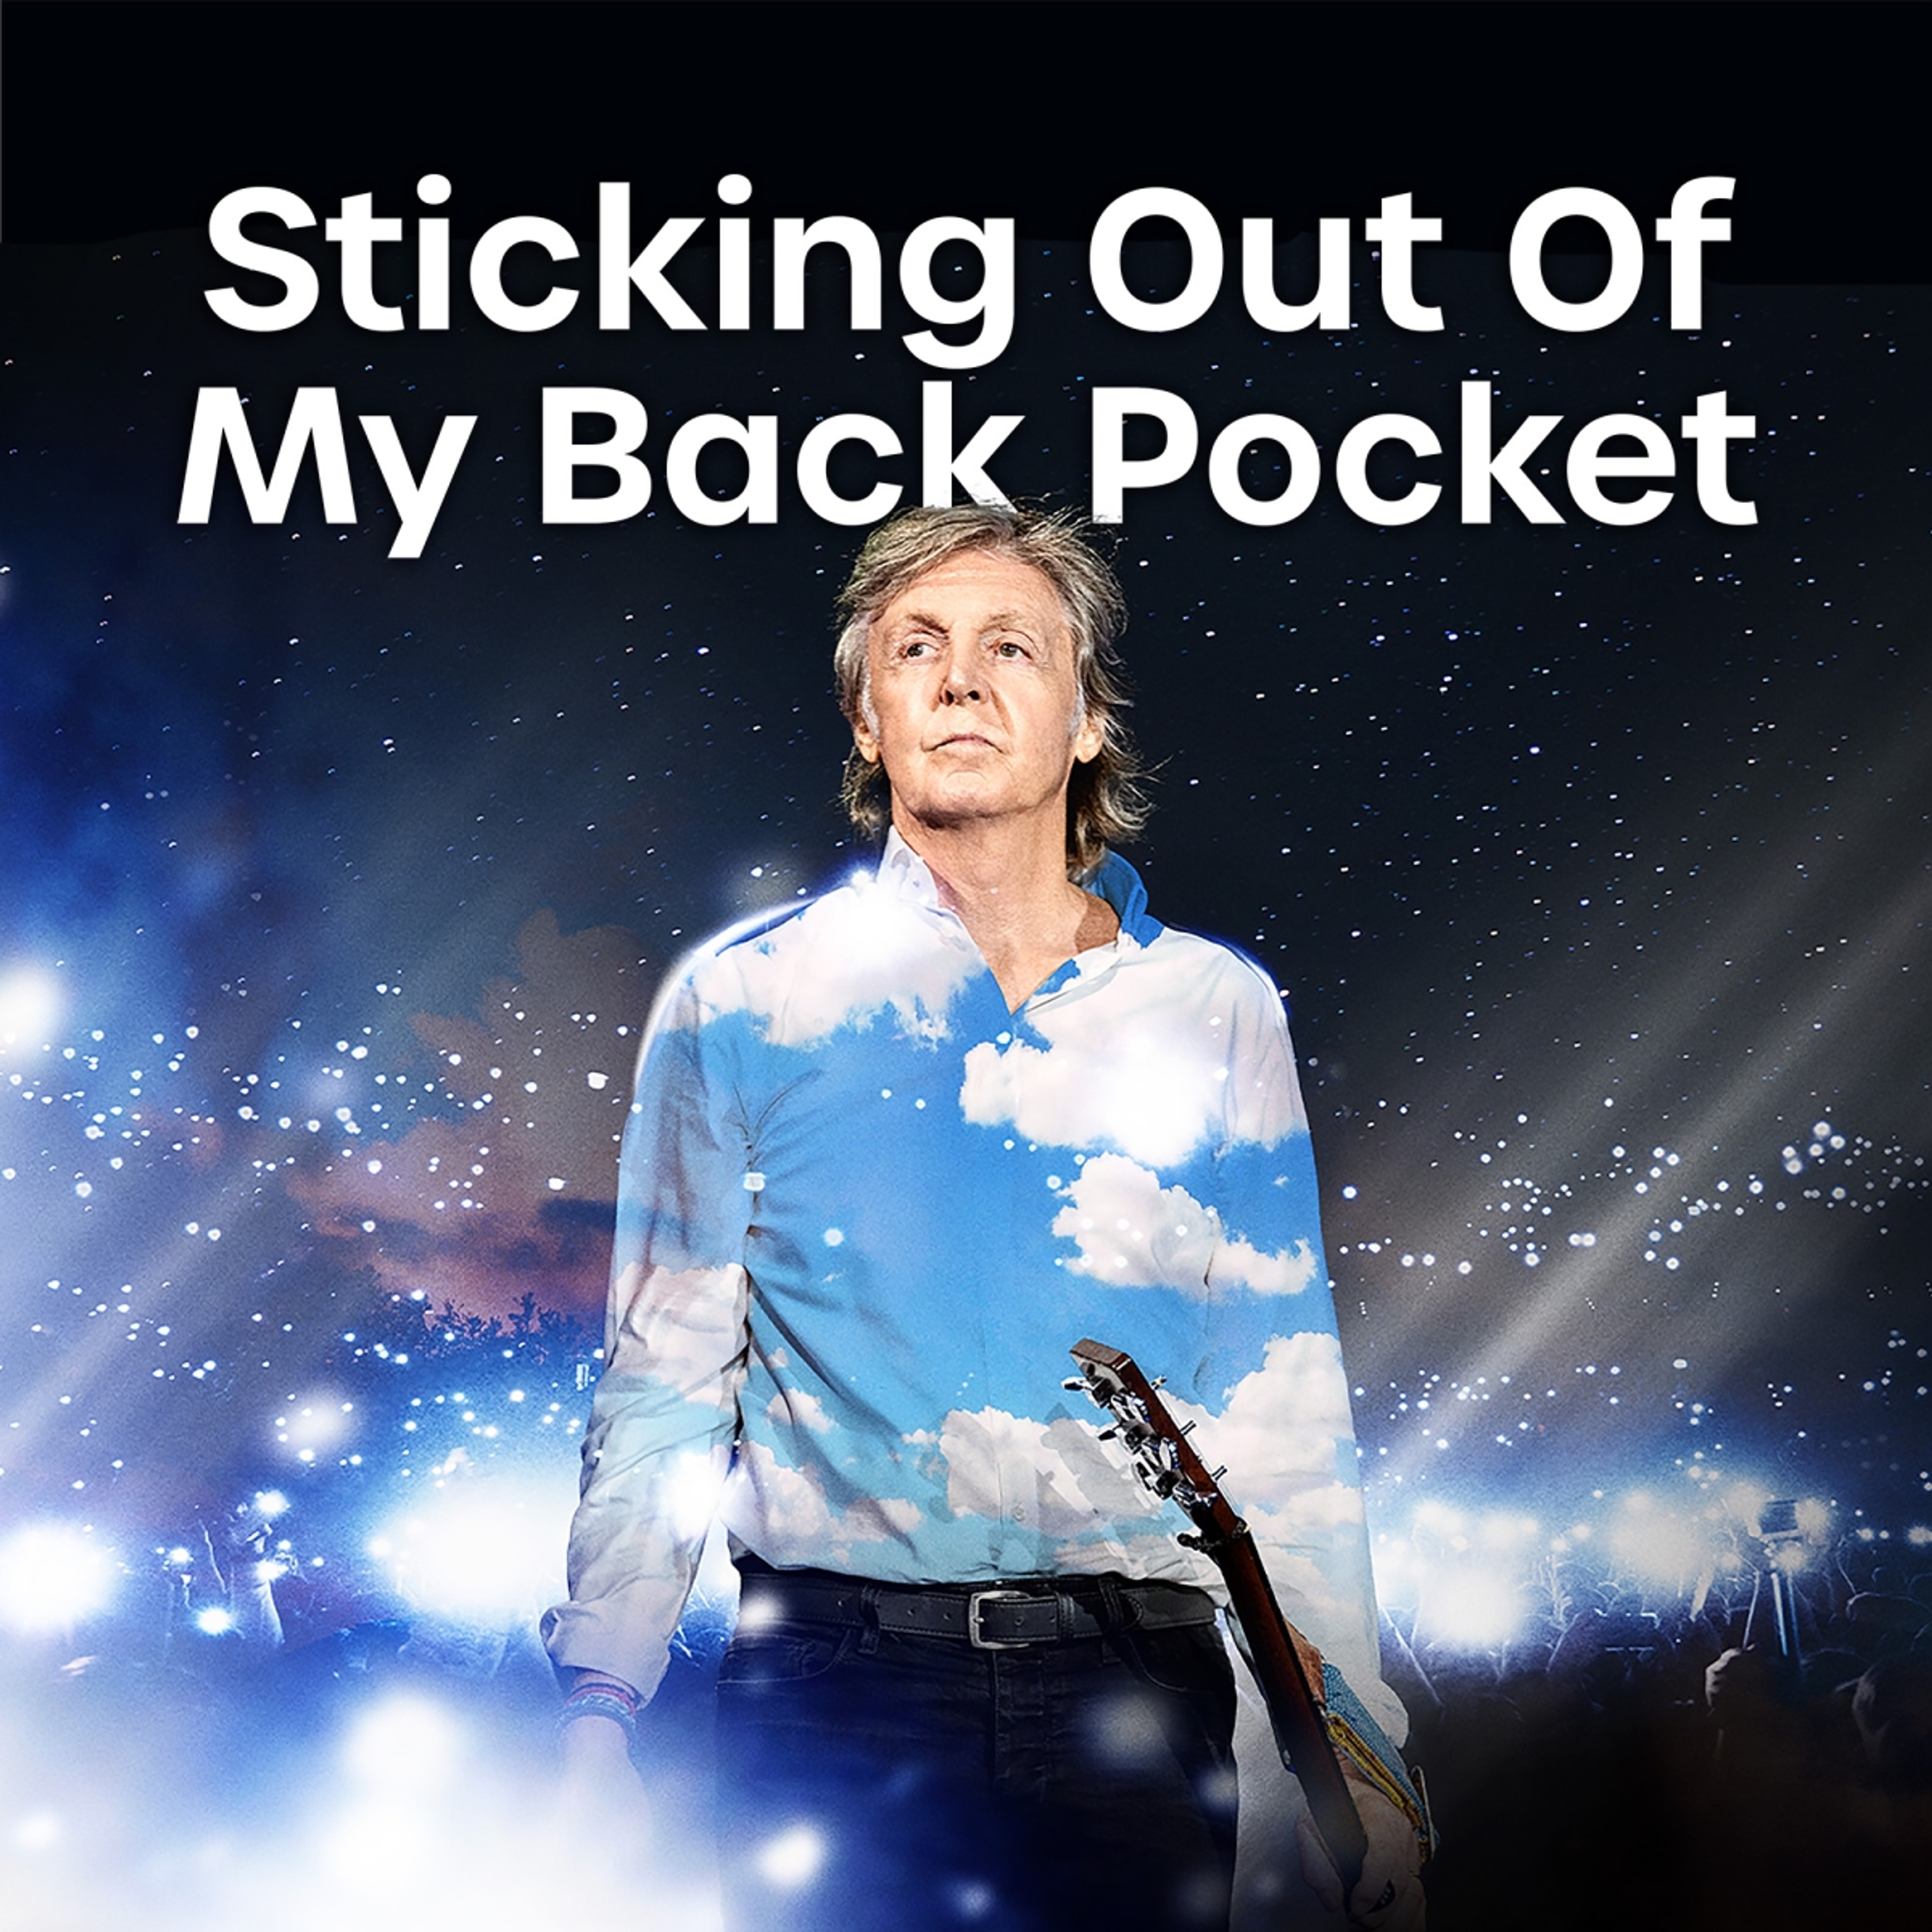 Photo of Paul used for promoting GOT BACK tour and 'Sticking Out Of My Back Pocket' playlist